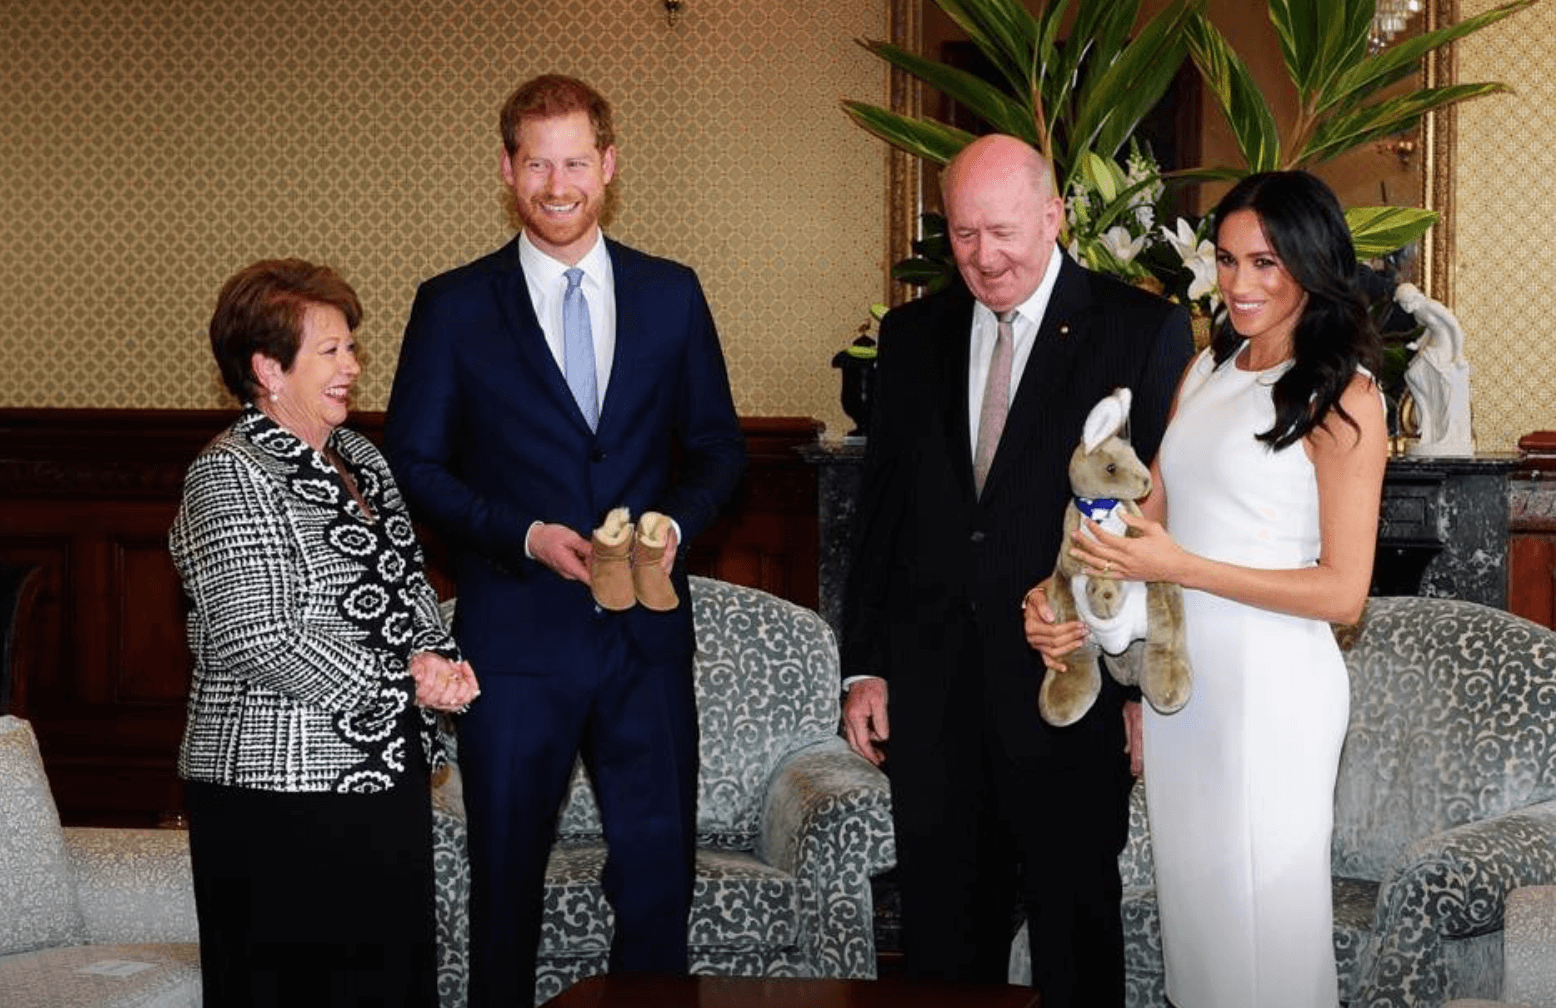 Their Royal Highnesses The Duke and Duchess of Sussex